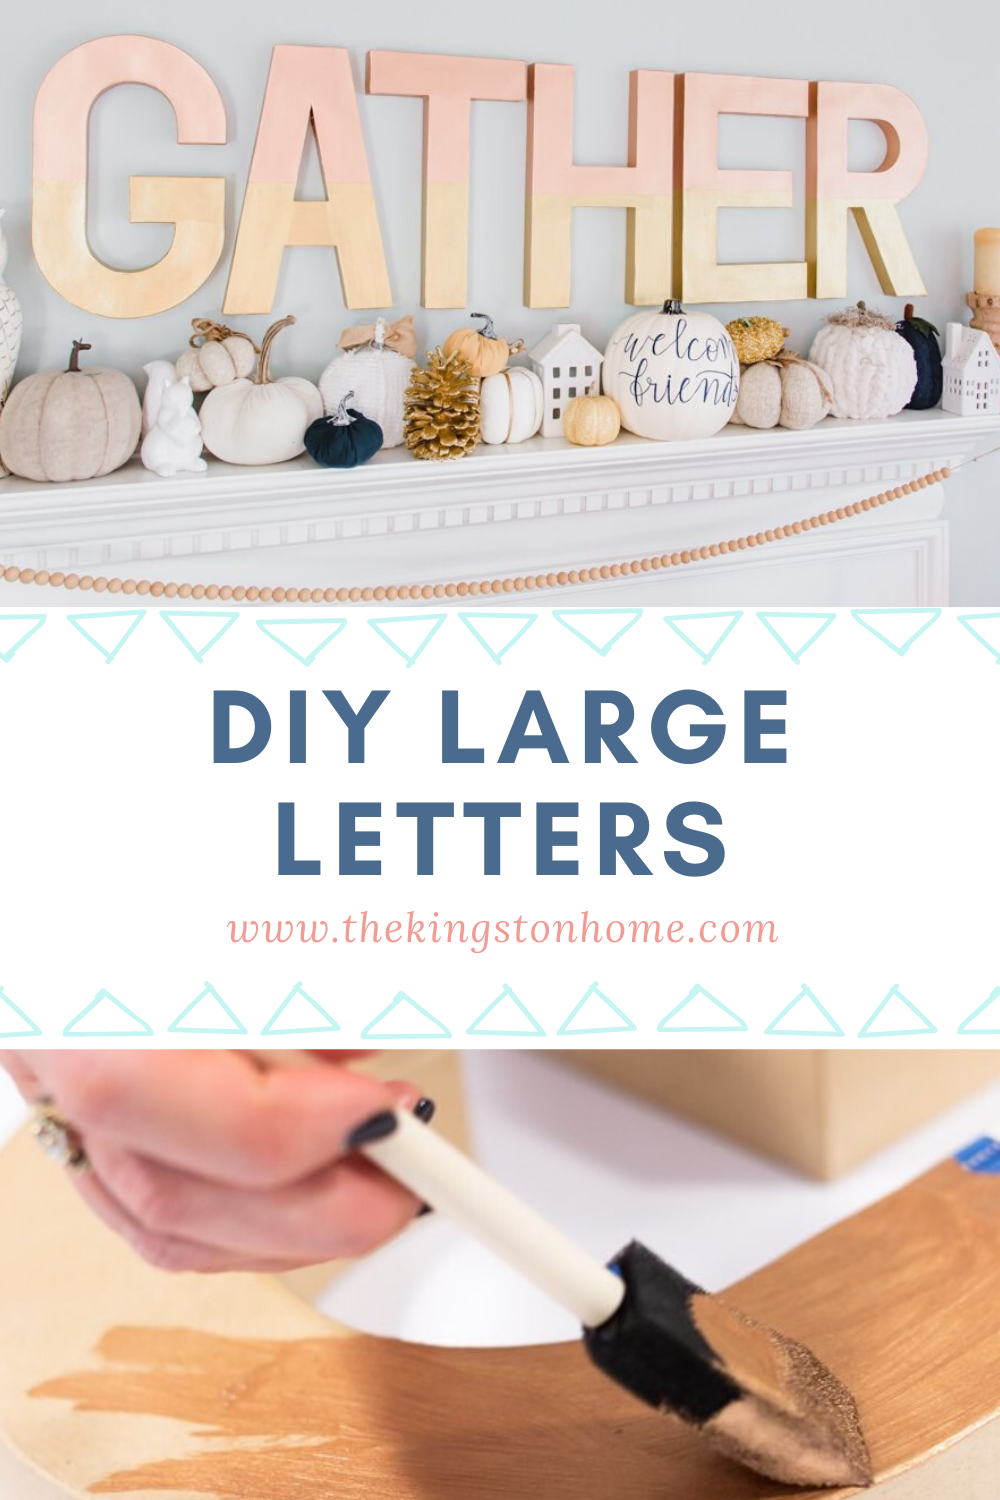 DIY Large Letters for Your Home Decor - The Kingston Home